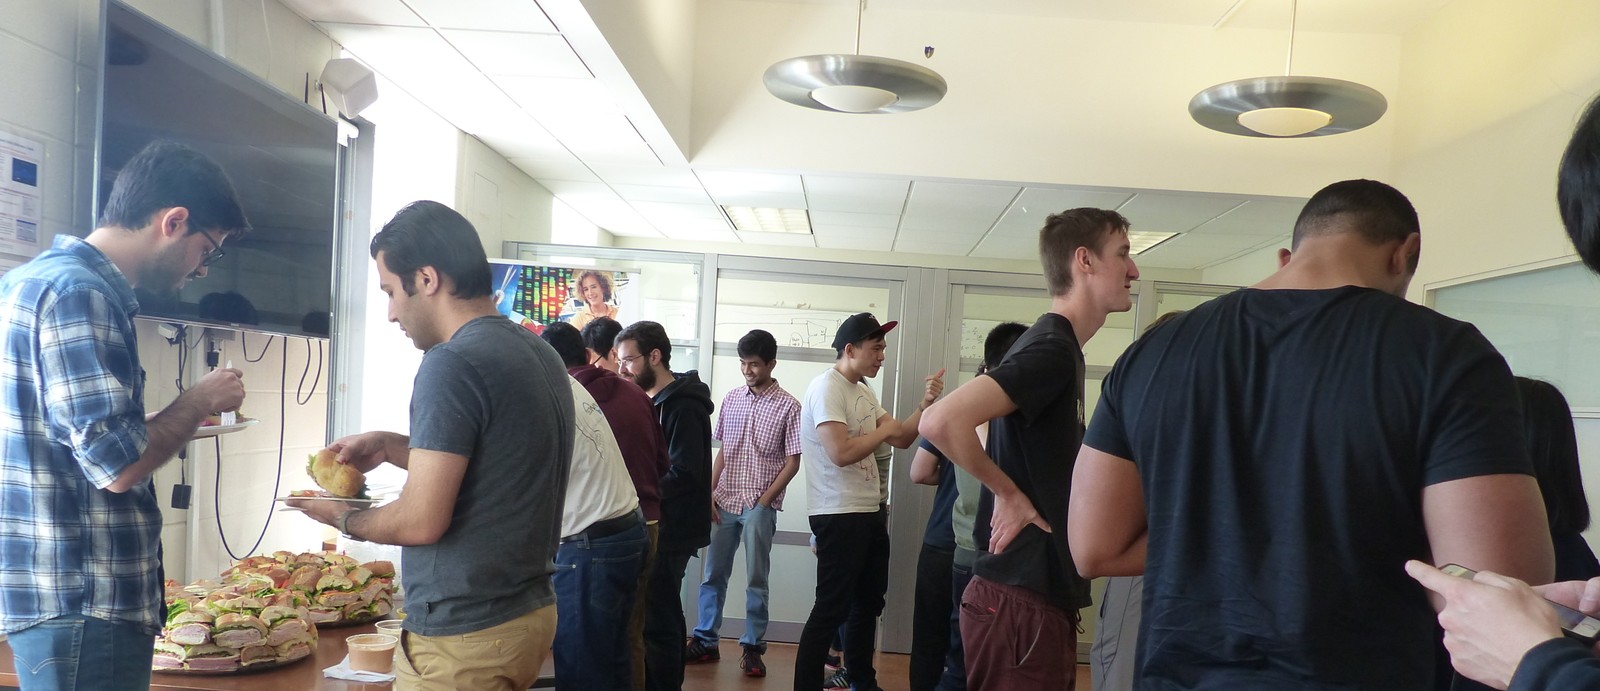 Members of Graduate Electrical Engineering at Columbia socializing during a mid-semester get-together